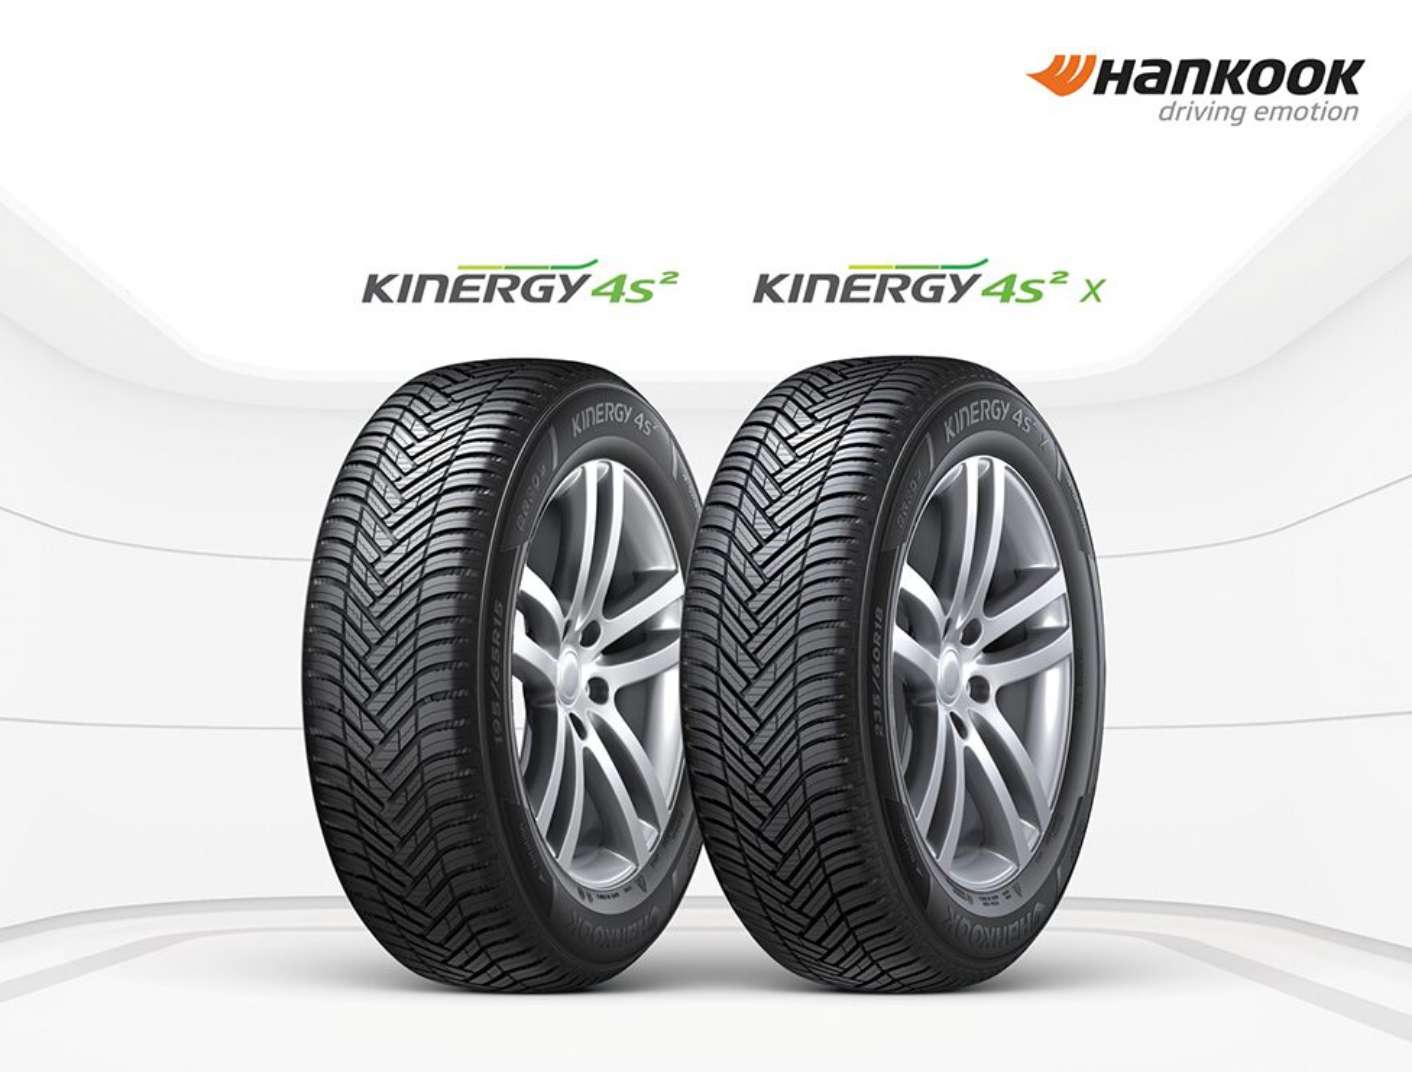 Hankook Tire receives International Sustainability & Carbon Certification (ISCC) PLUS, the first among tire manufacturers